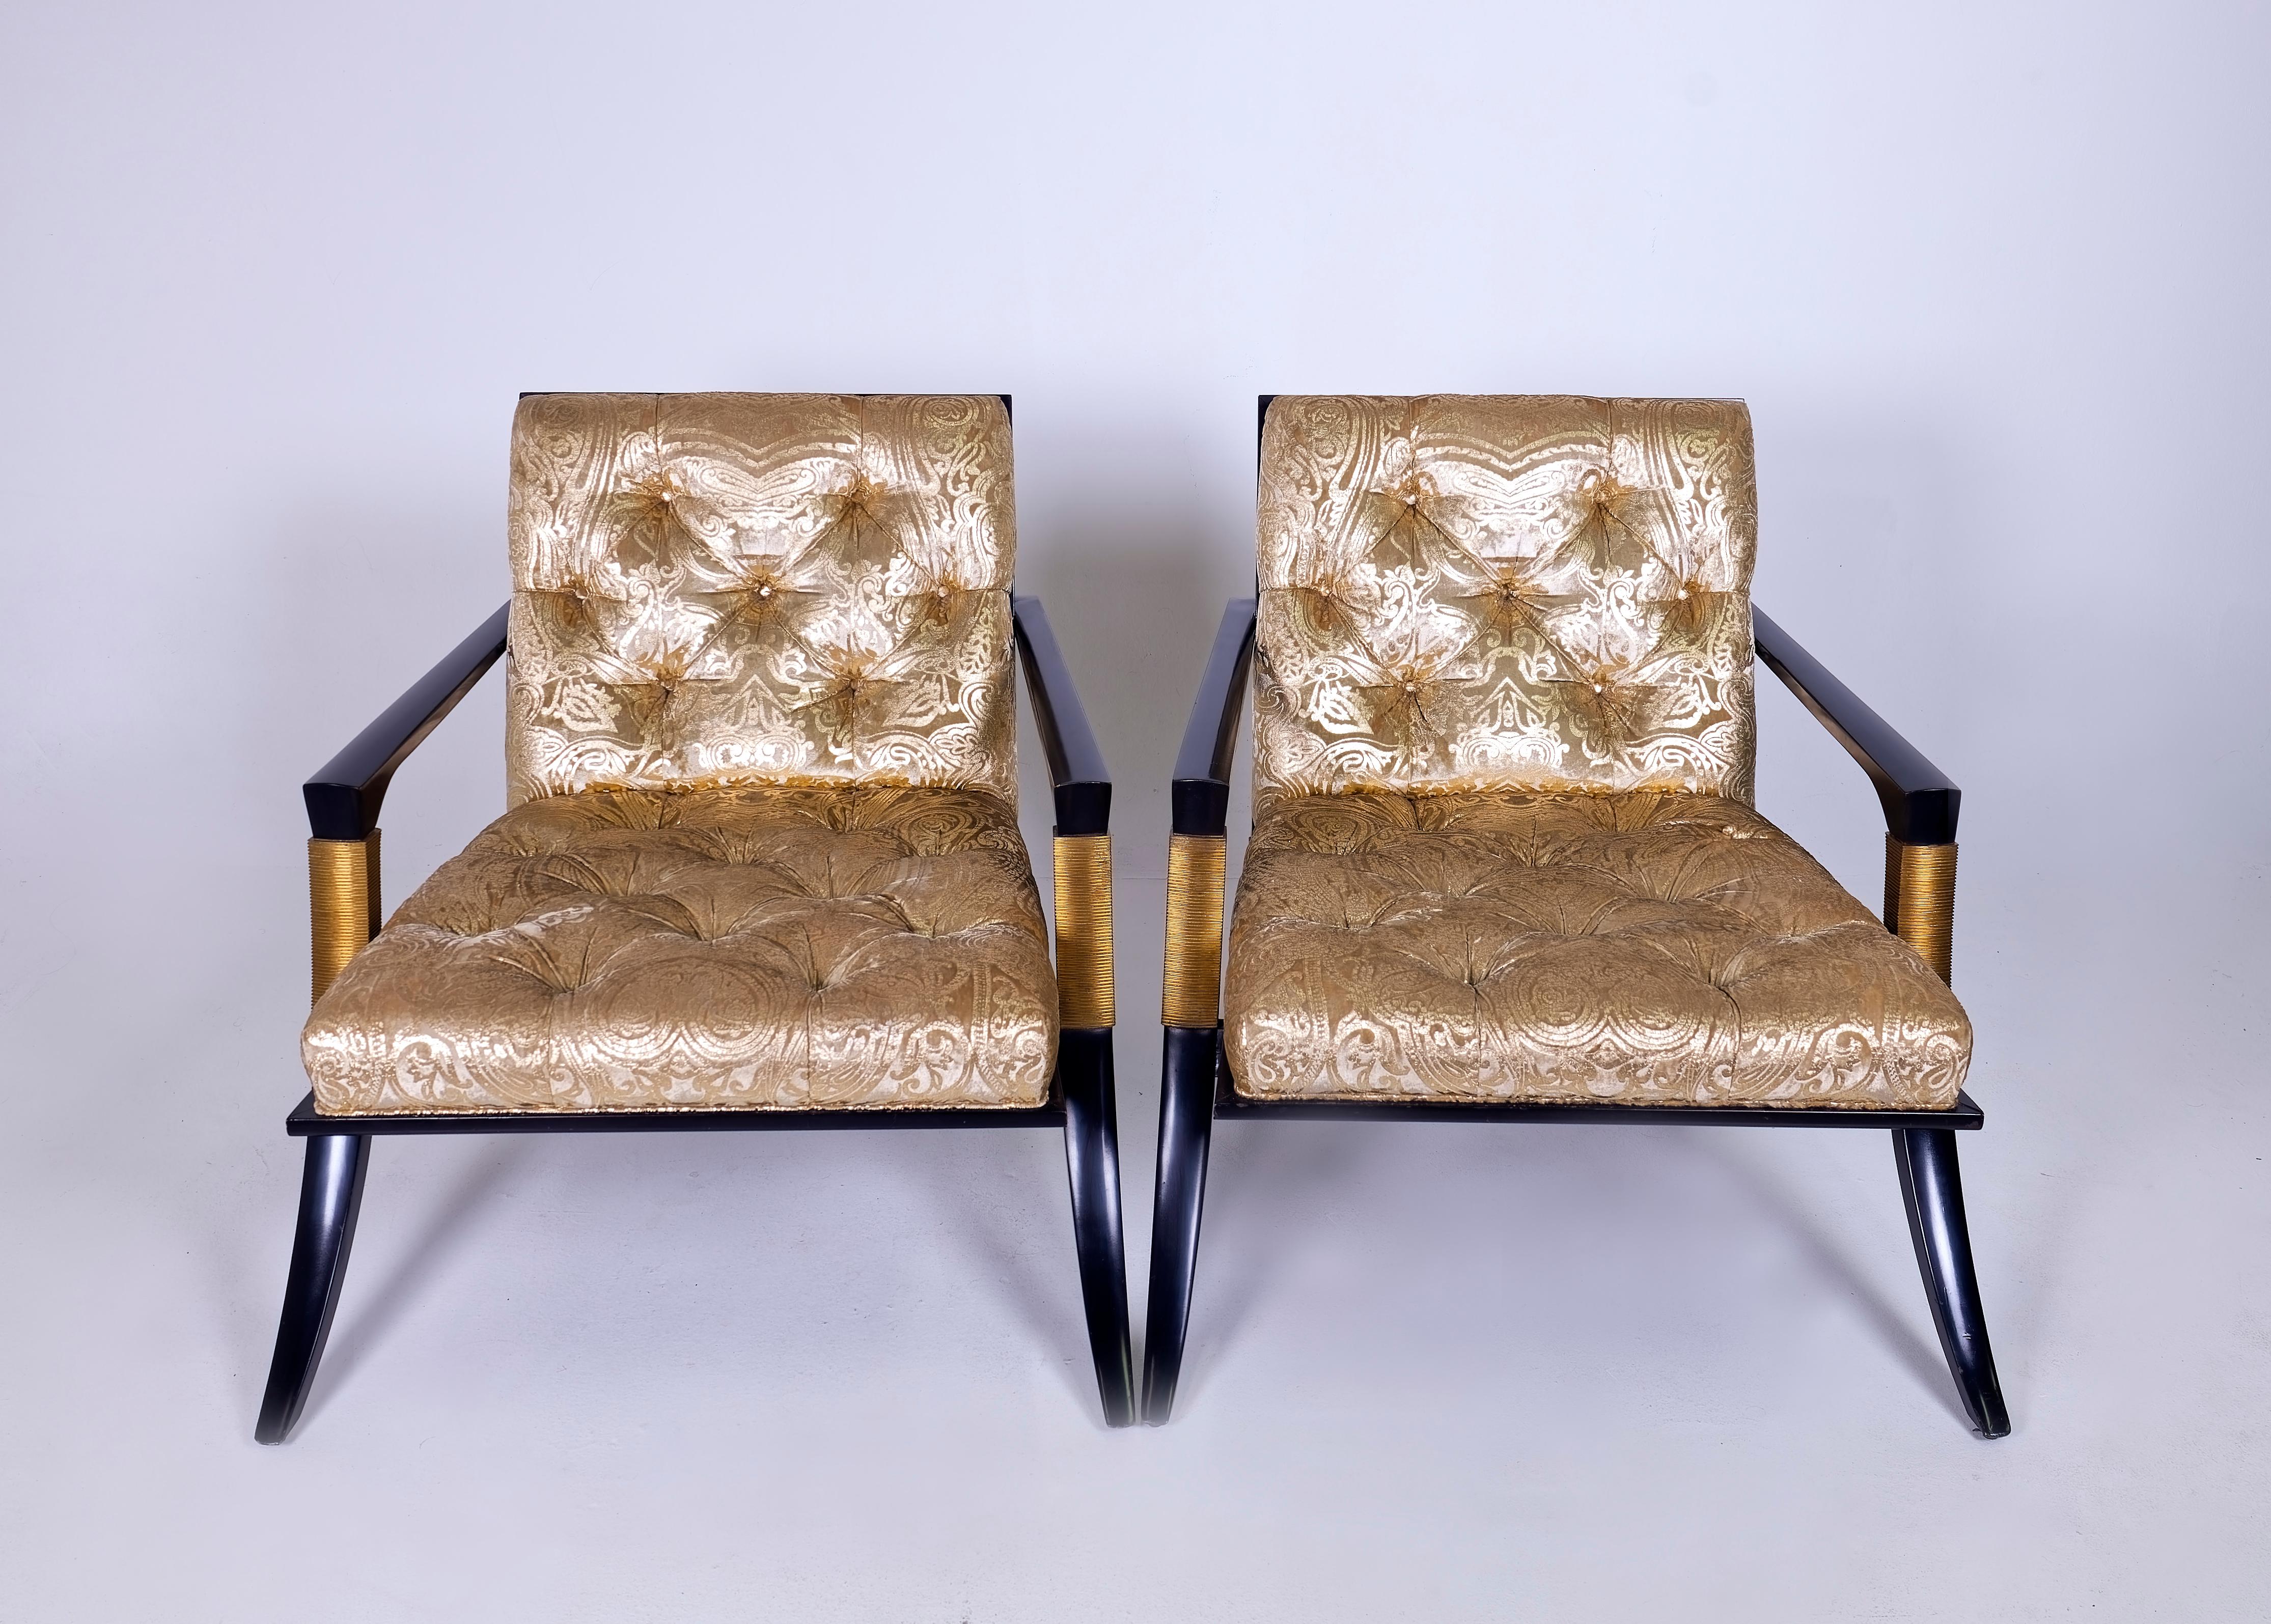 Contemporary Pair of Athens Lounge Chairs by Thomas Pheasant for Baker, Klismos Gold Tufted